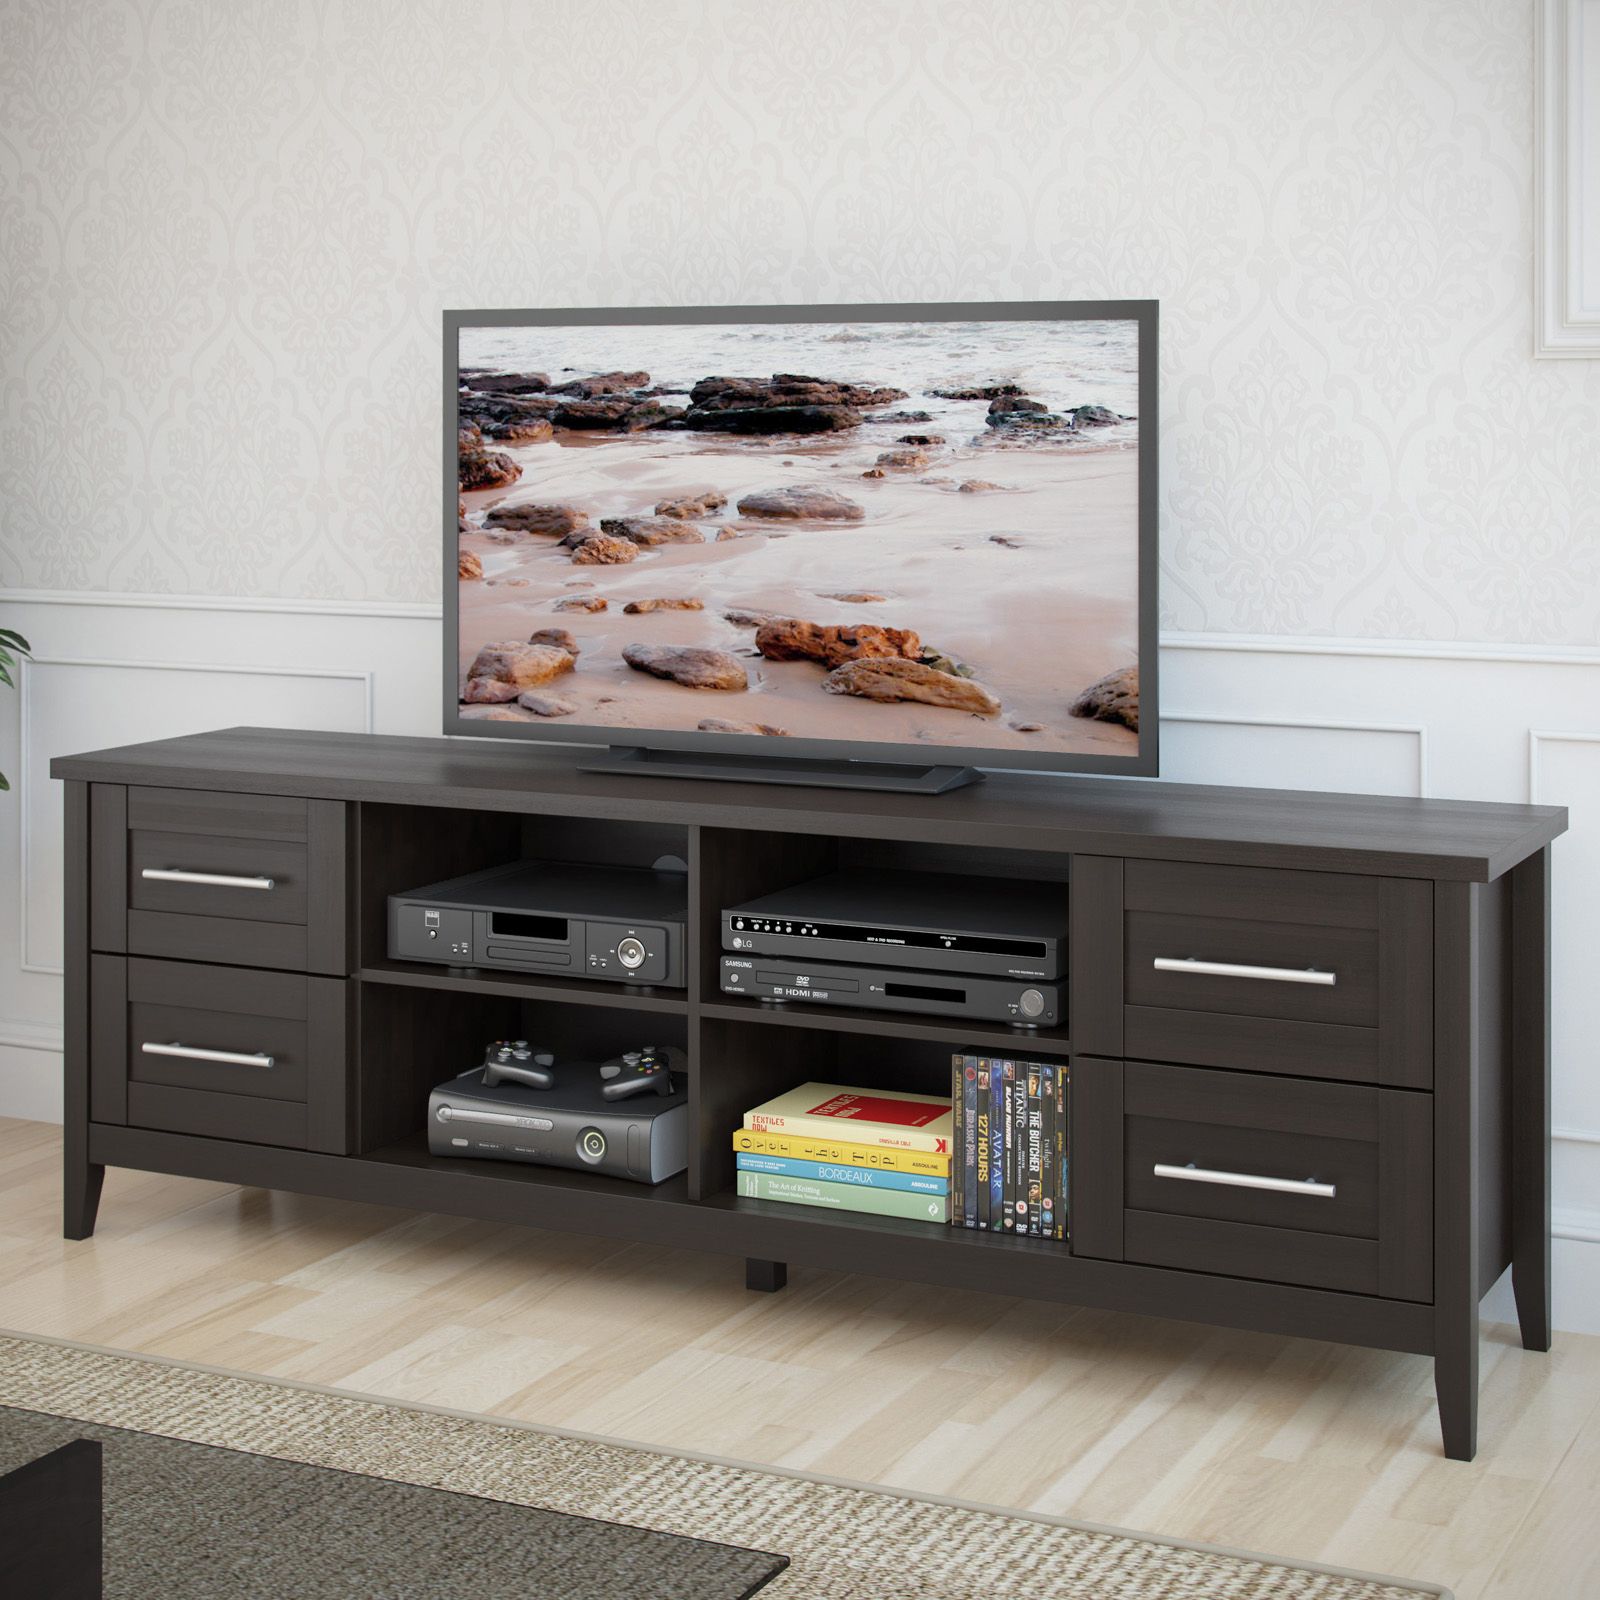 Corliving Tjk 682 B Jackson Extra Wide Tv Bench – Espresso With Regard To Anya Wide Tv Stands (View 4 of 15)